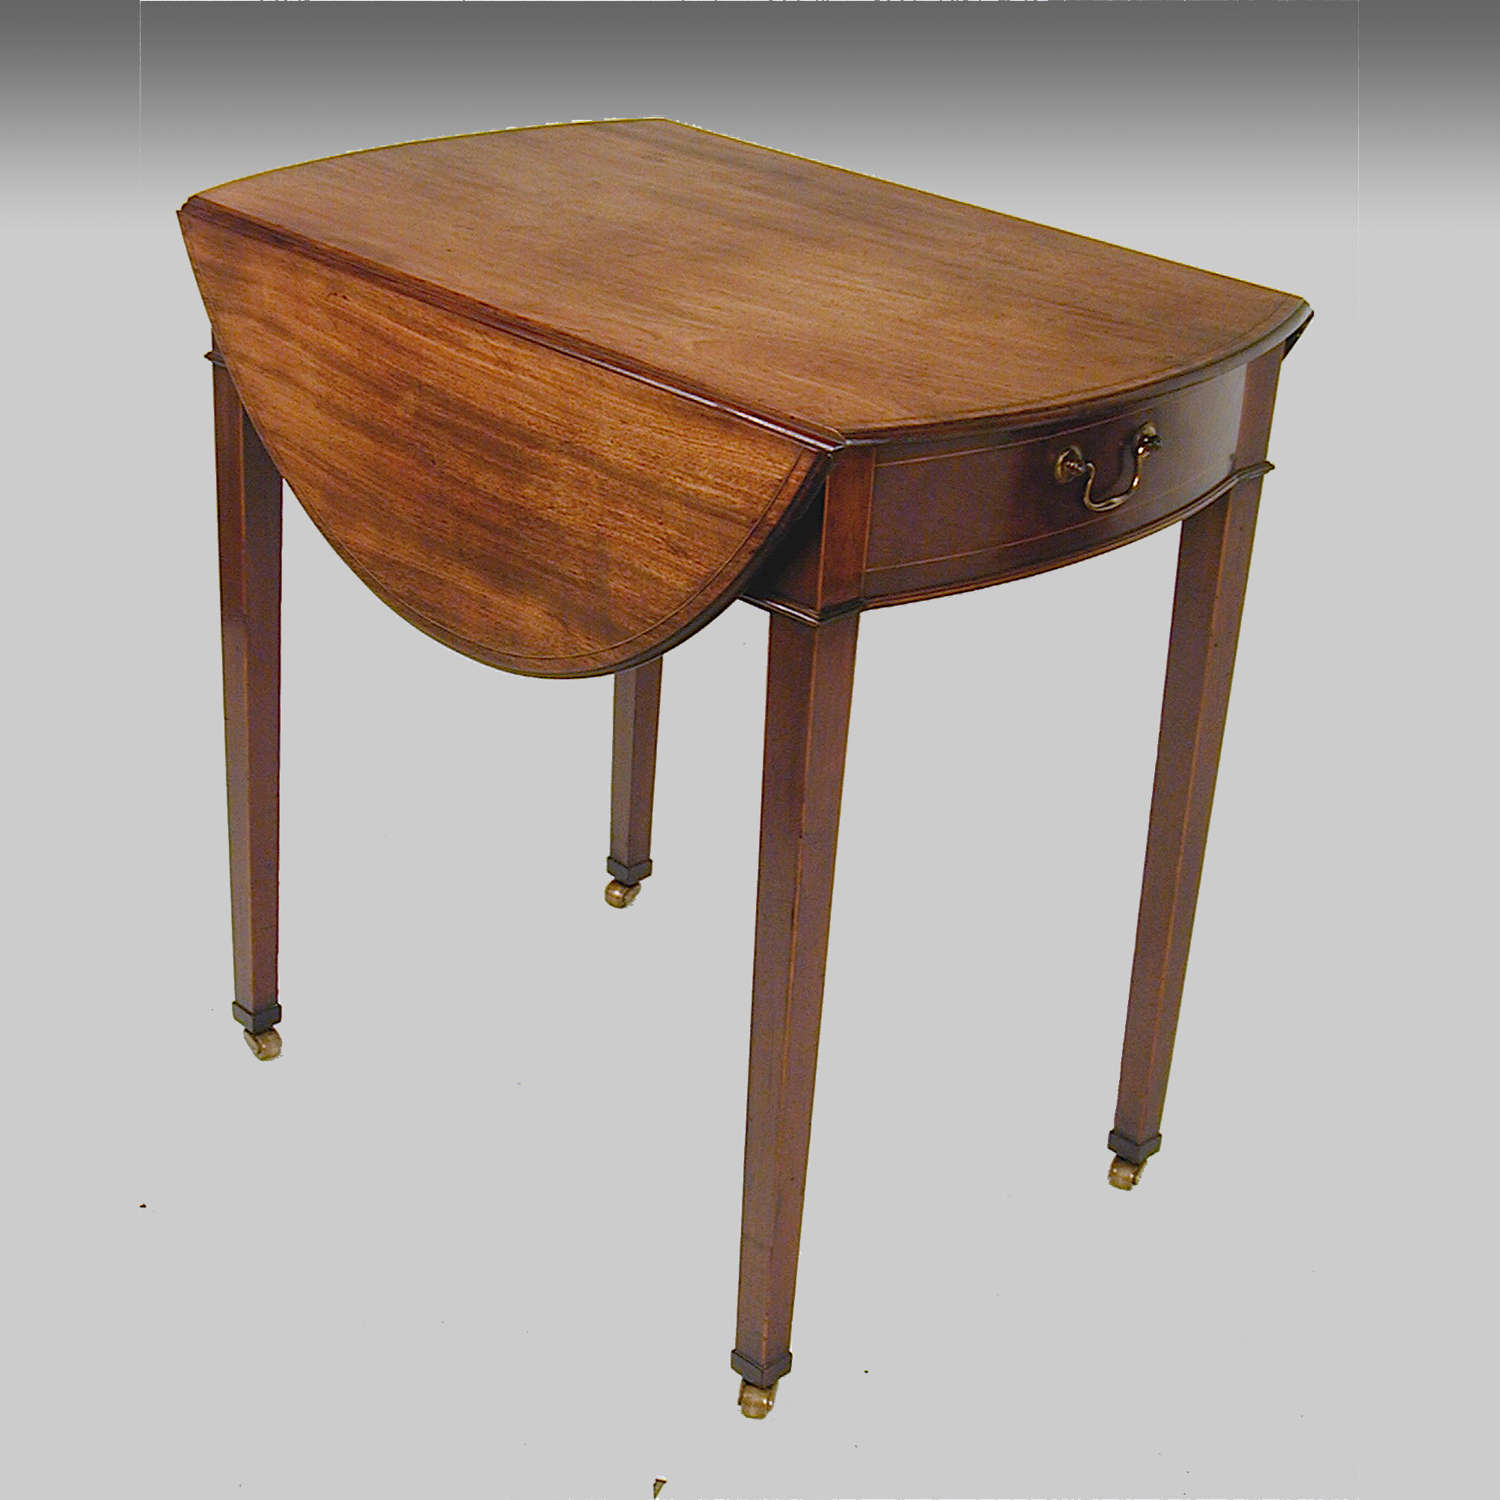 Georgian oval mahogany Pembroke table with secret strongbox drawer